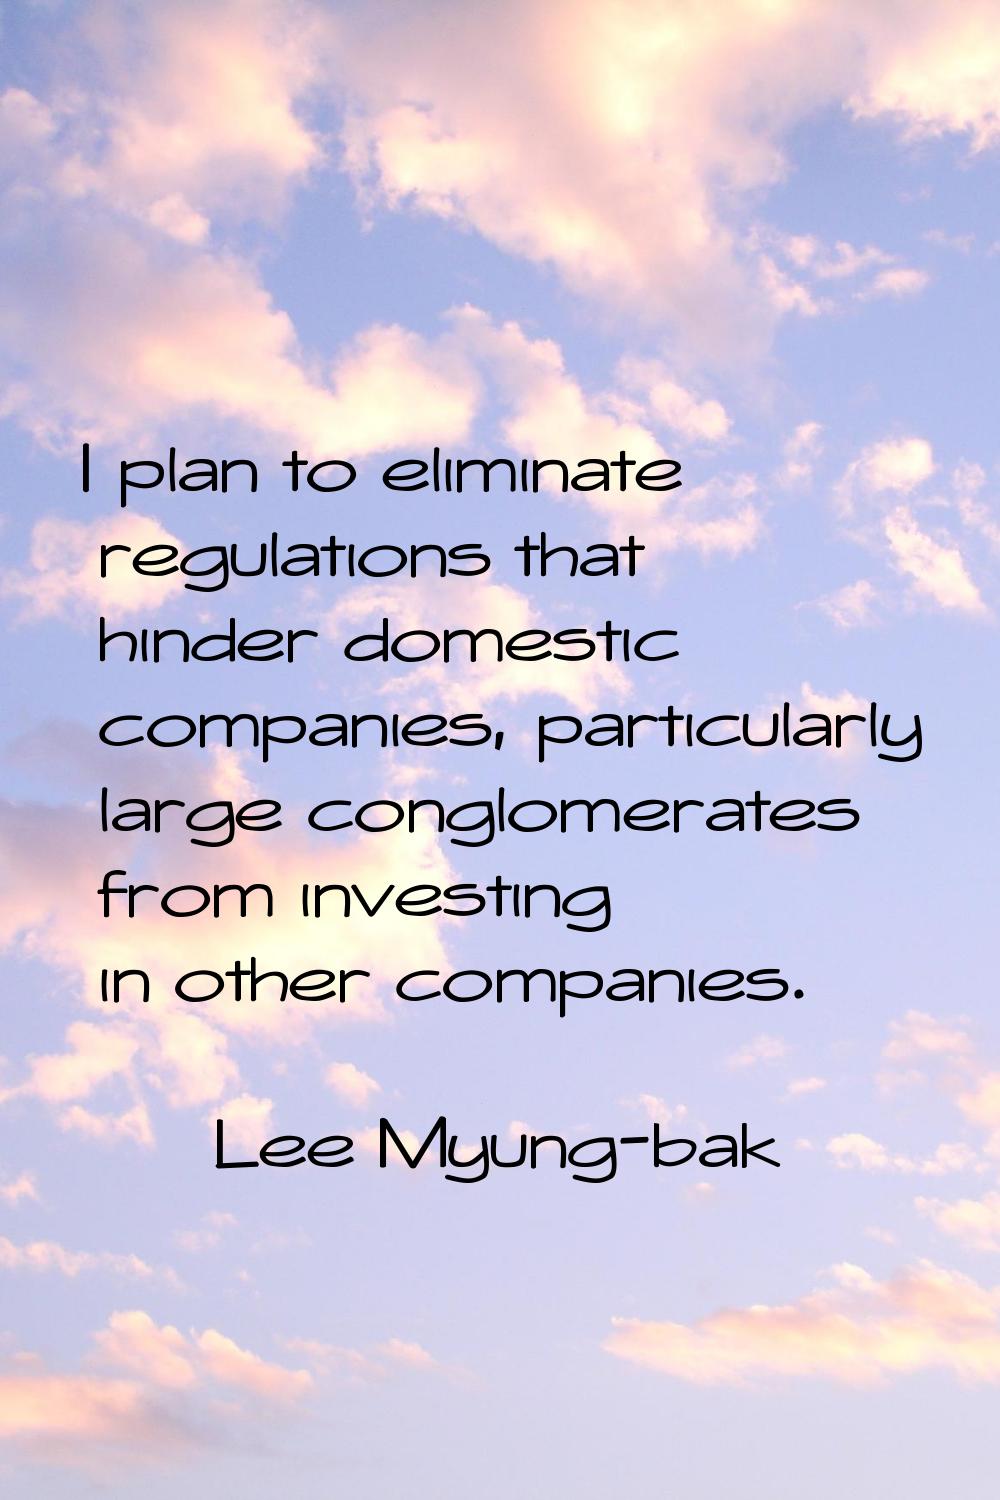 I plan to eliminate regulations that hinder domestic companies, particularly large conglomerates fr